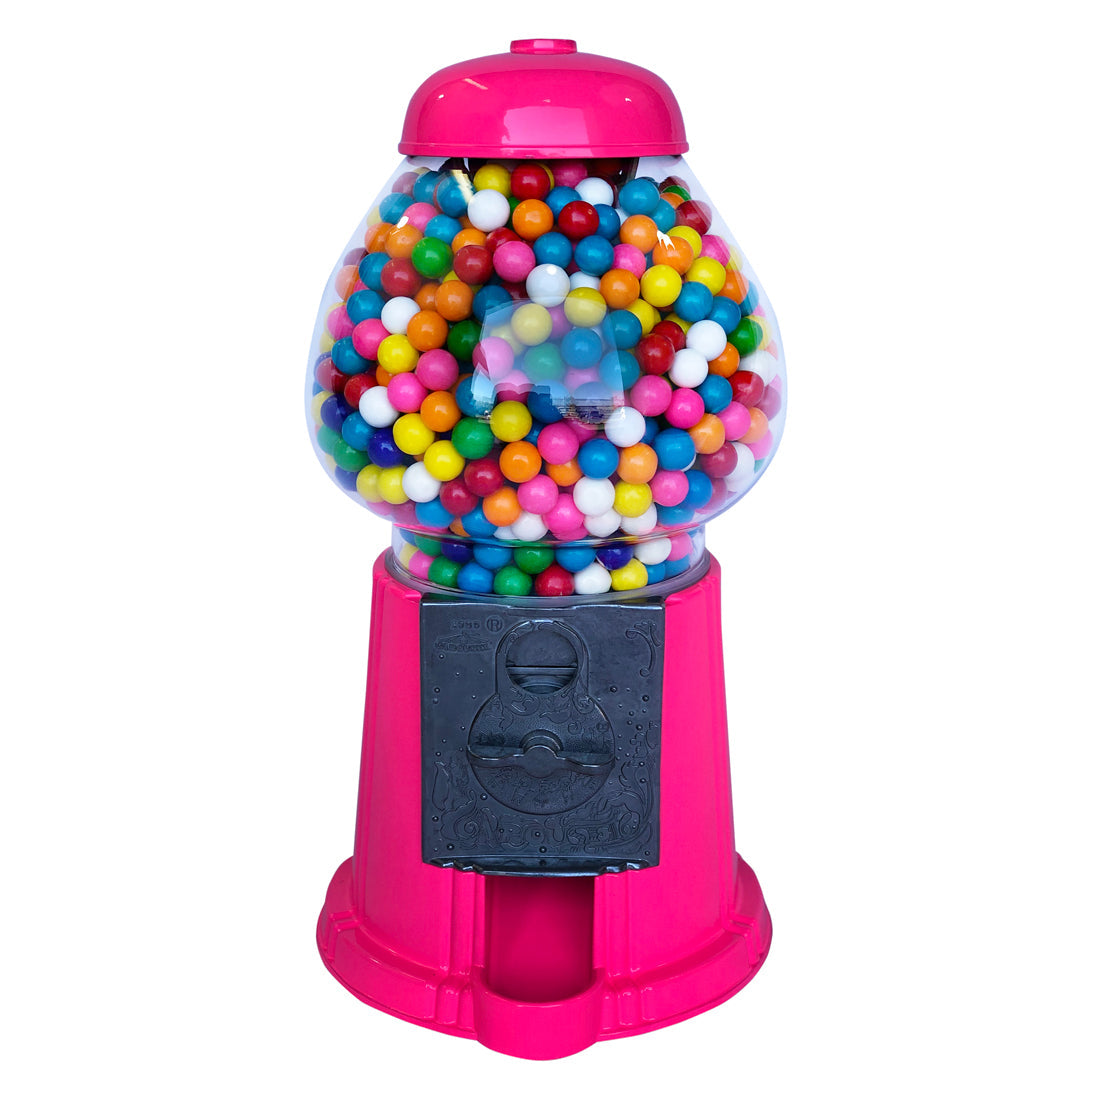 Gumball Dreams Classic Machine / Candy Dispenser - Hot Pink Toys & Games